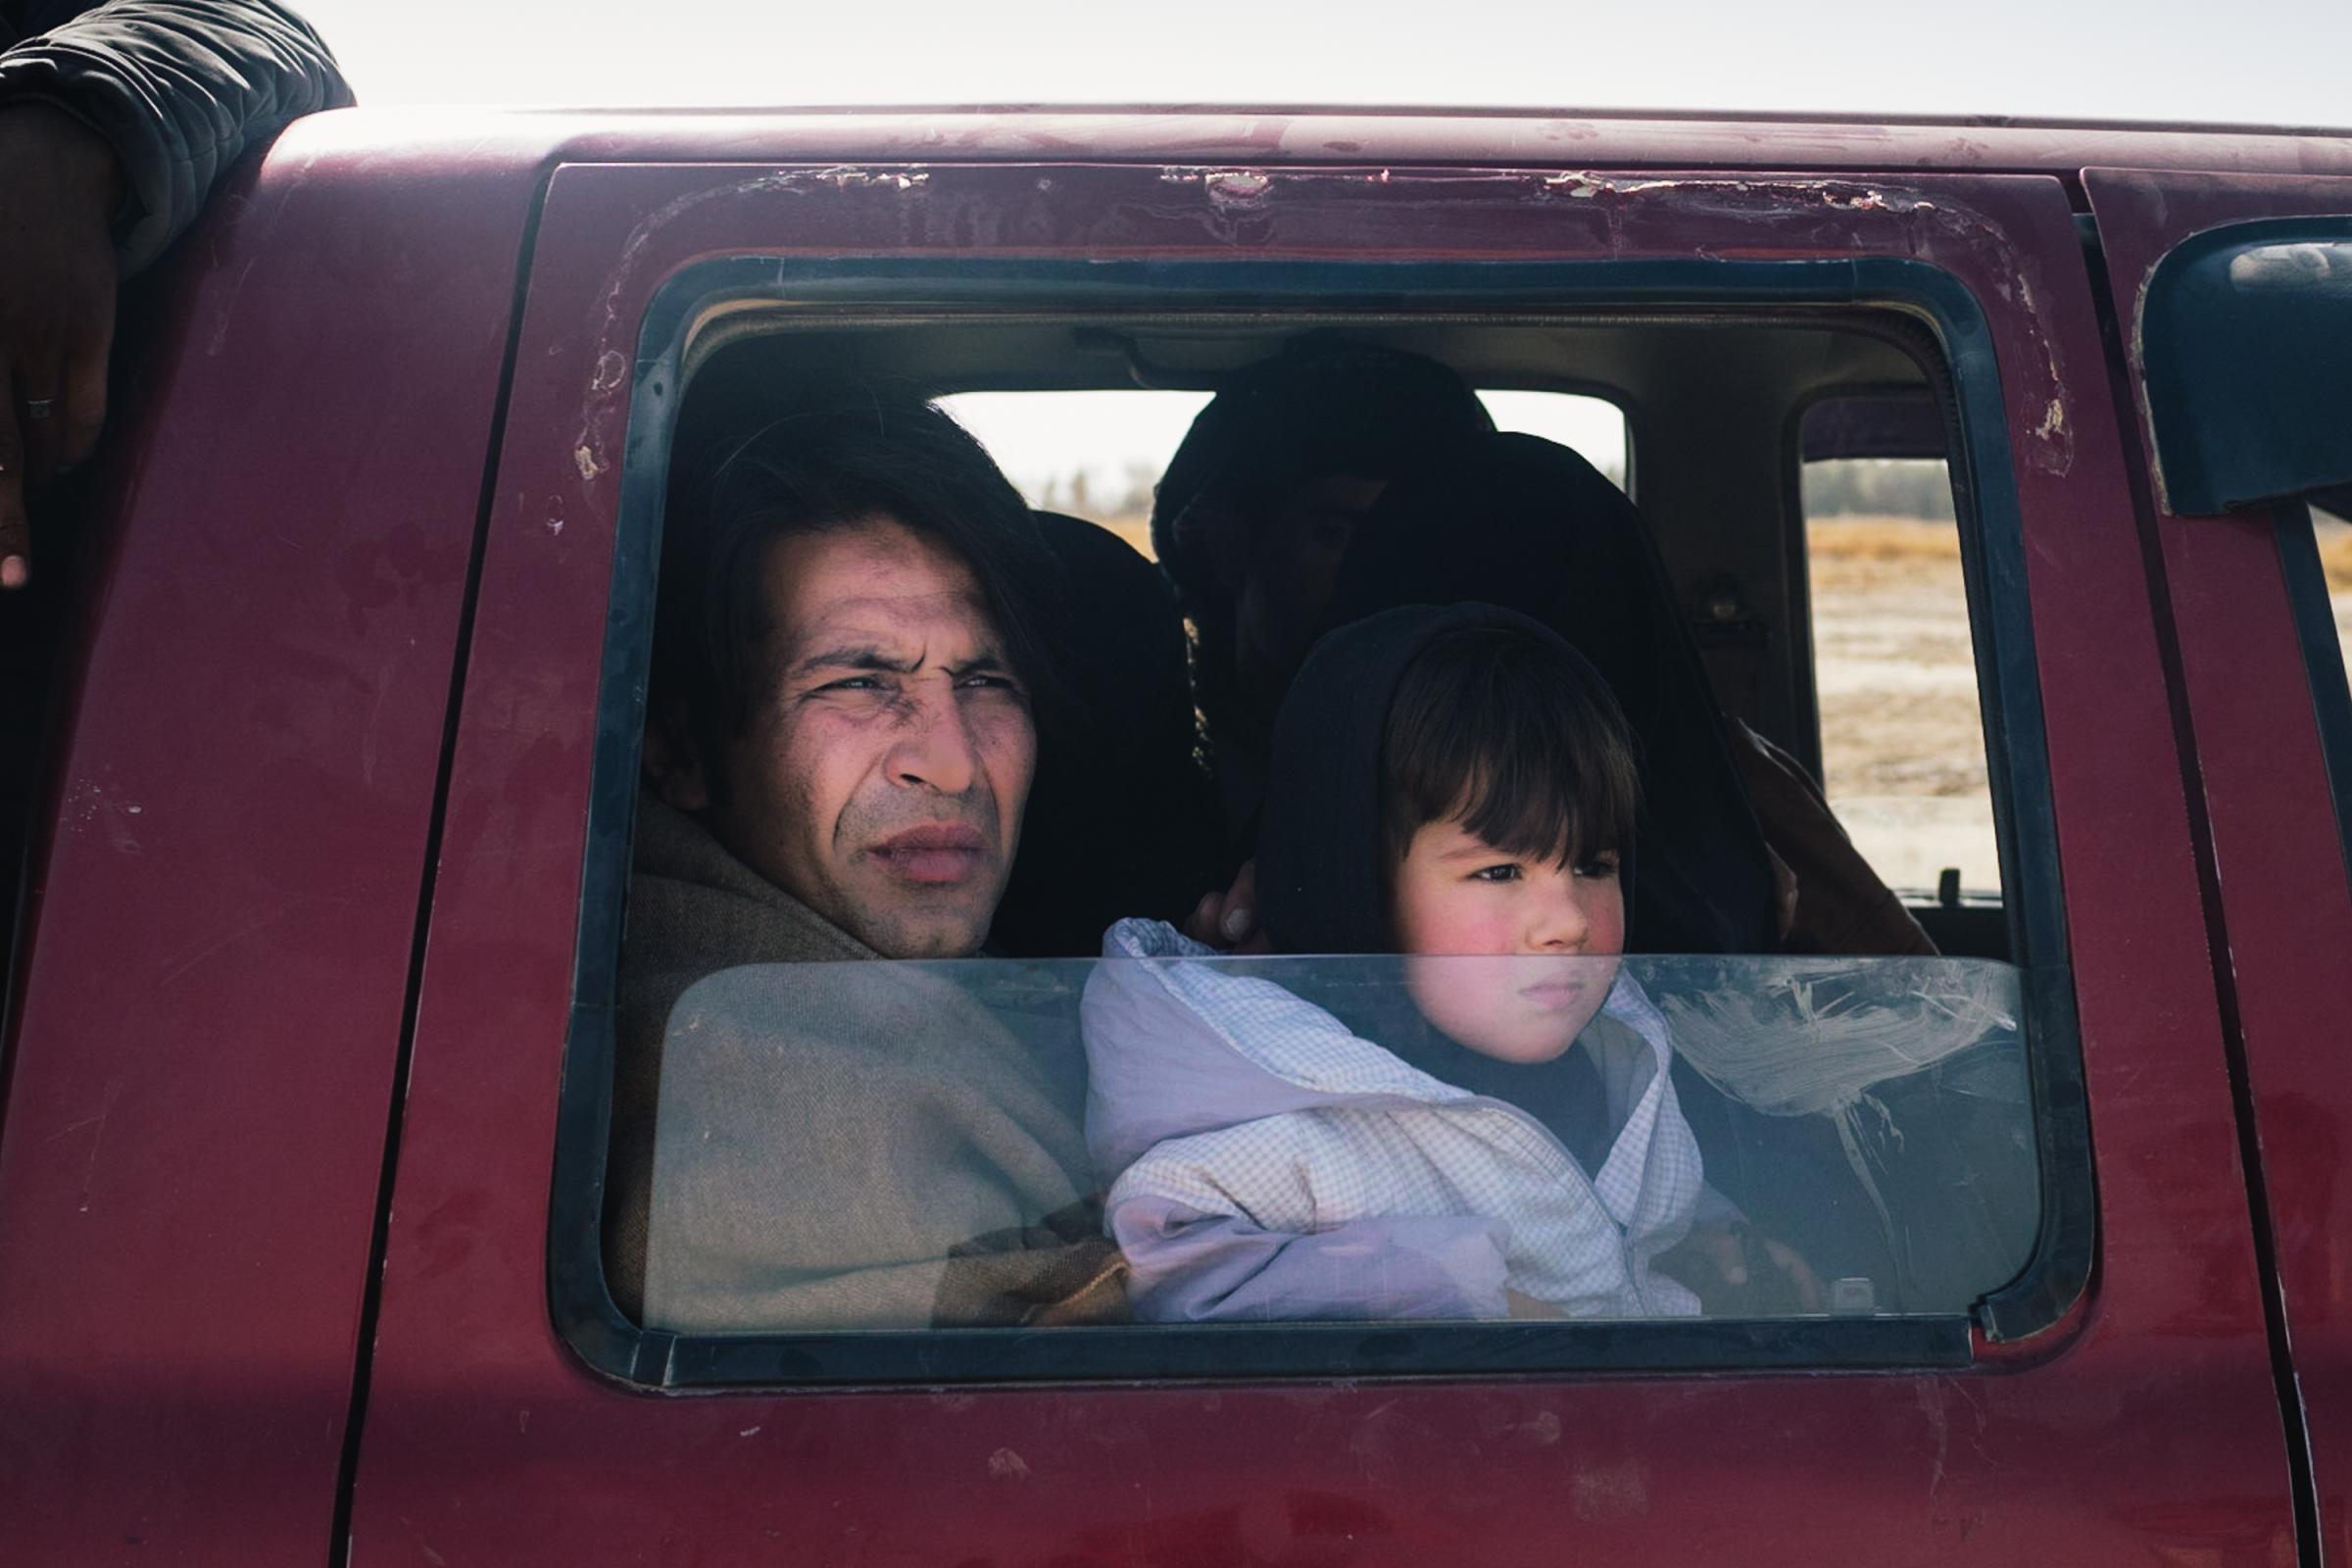 Mohammed from Herat with his daughter shortly before starting the difficult journey to Iran.